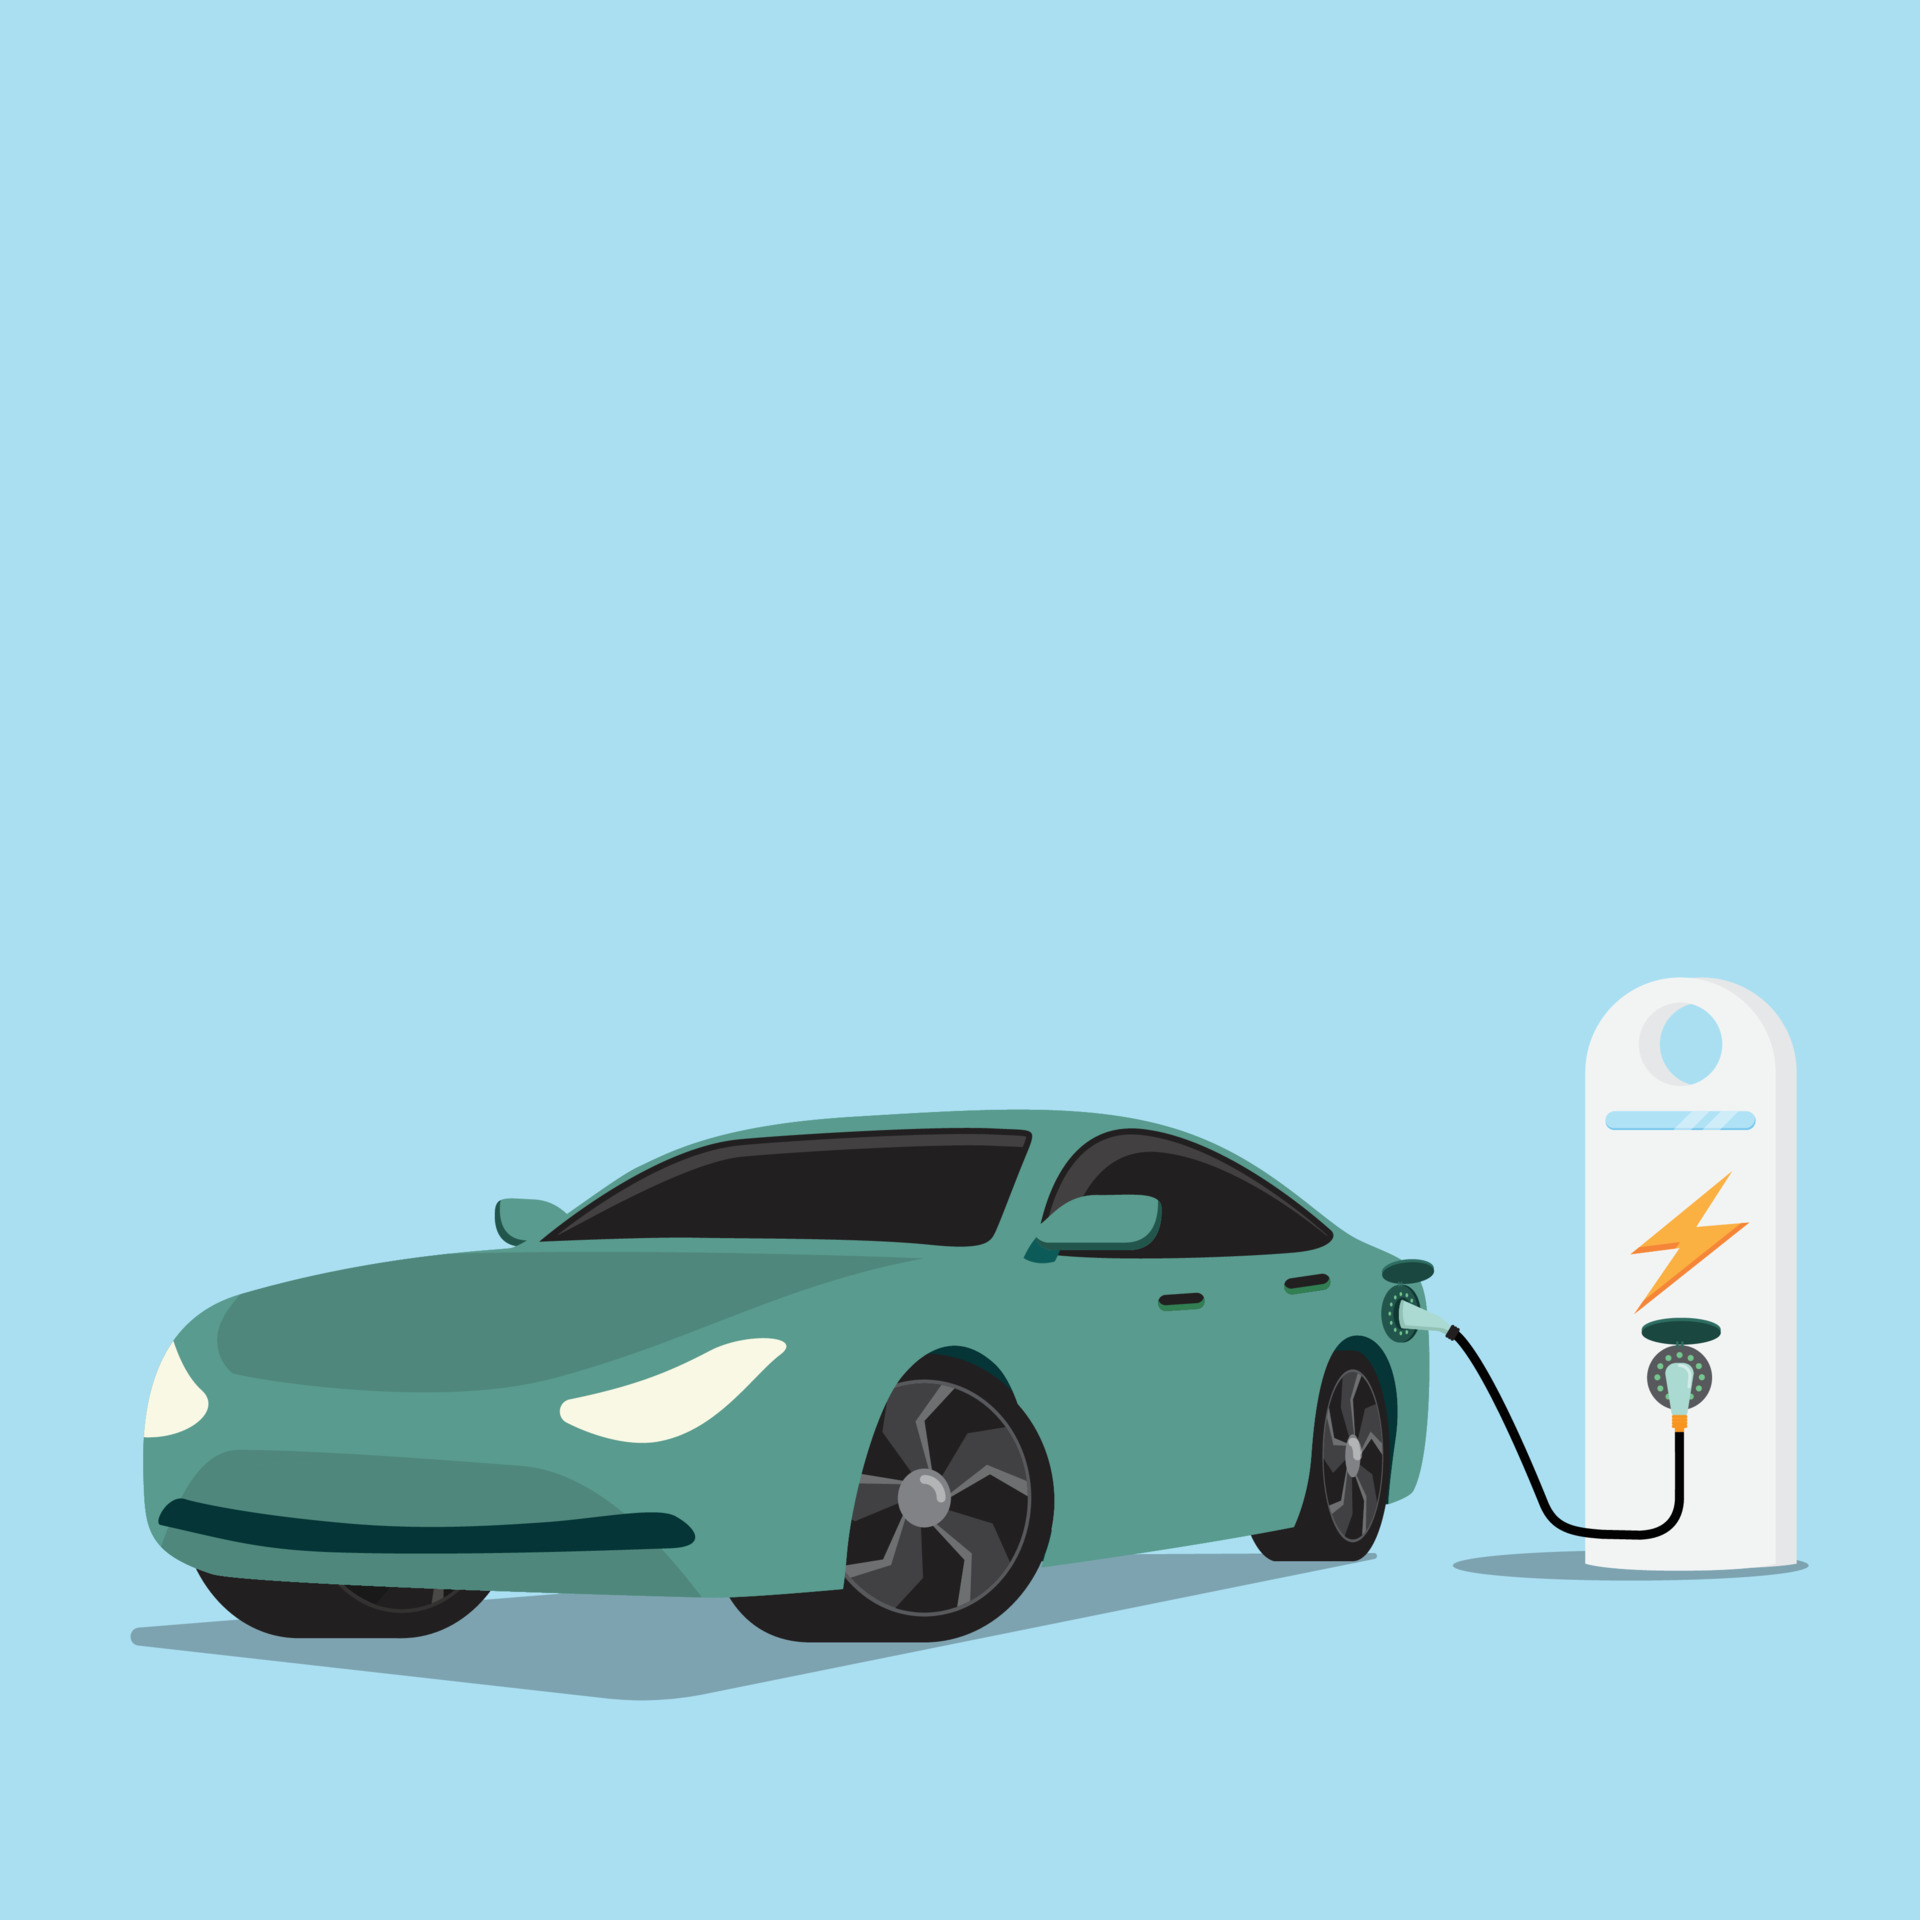 IRS' new program will be incentivizing purchases of electric vehicles. (Photo: Vecteezy)